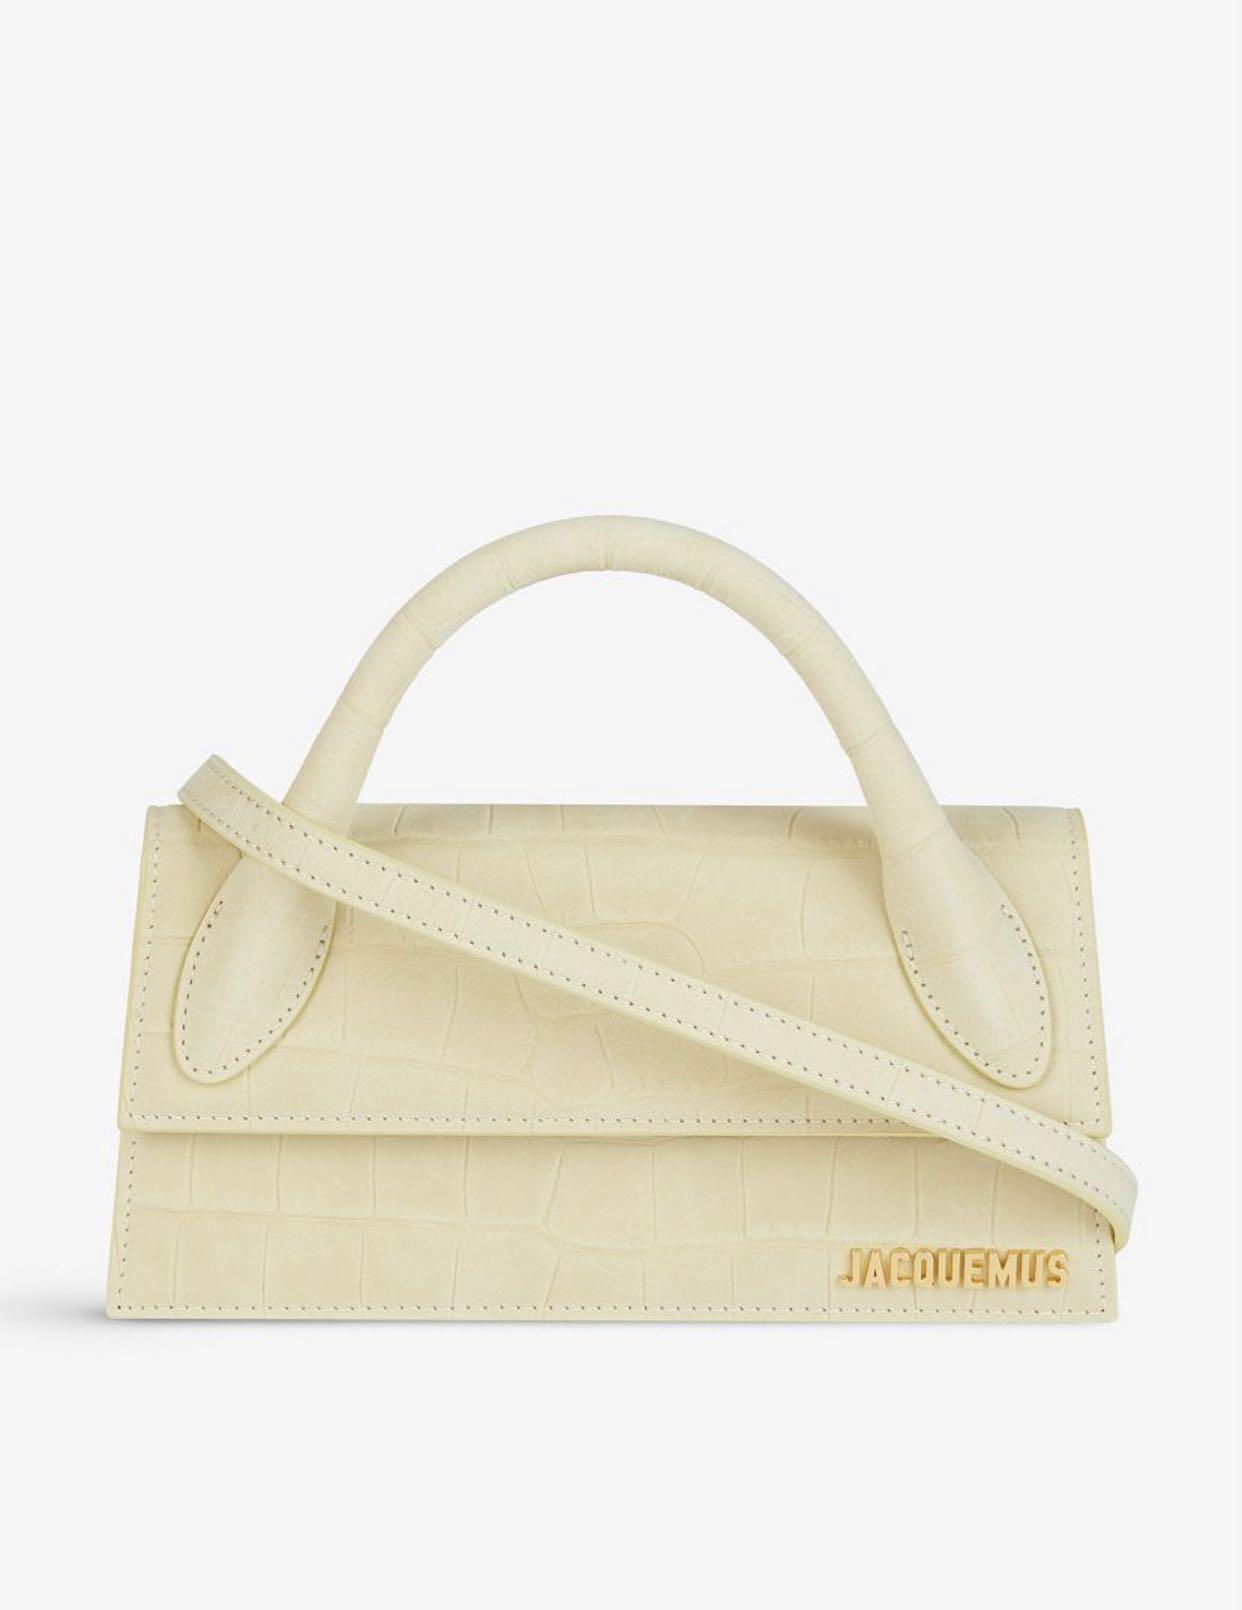 Jacquemus Yellow Suede Le Chiquito Bag, myGemma, CH